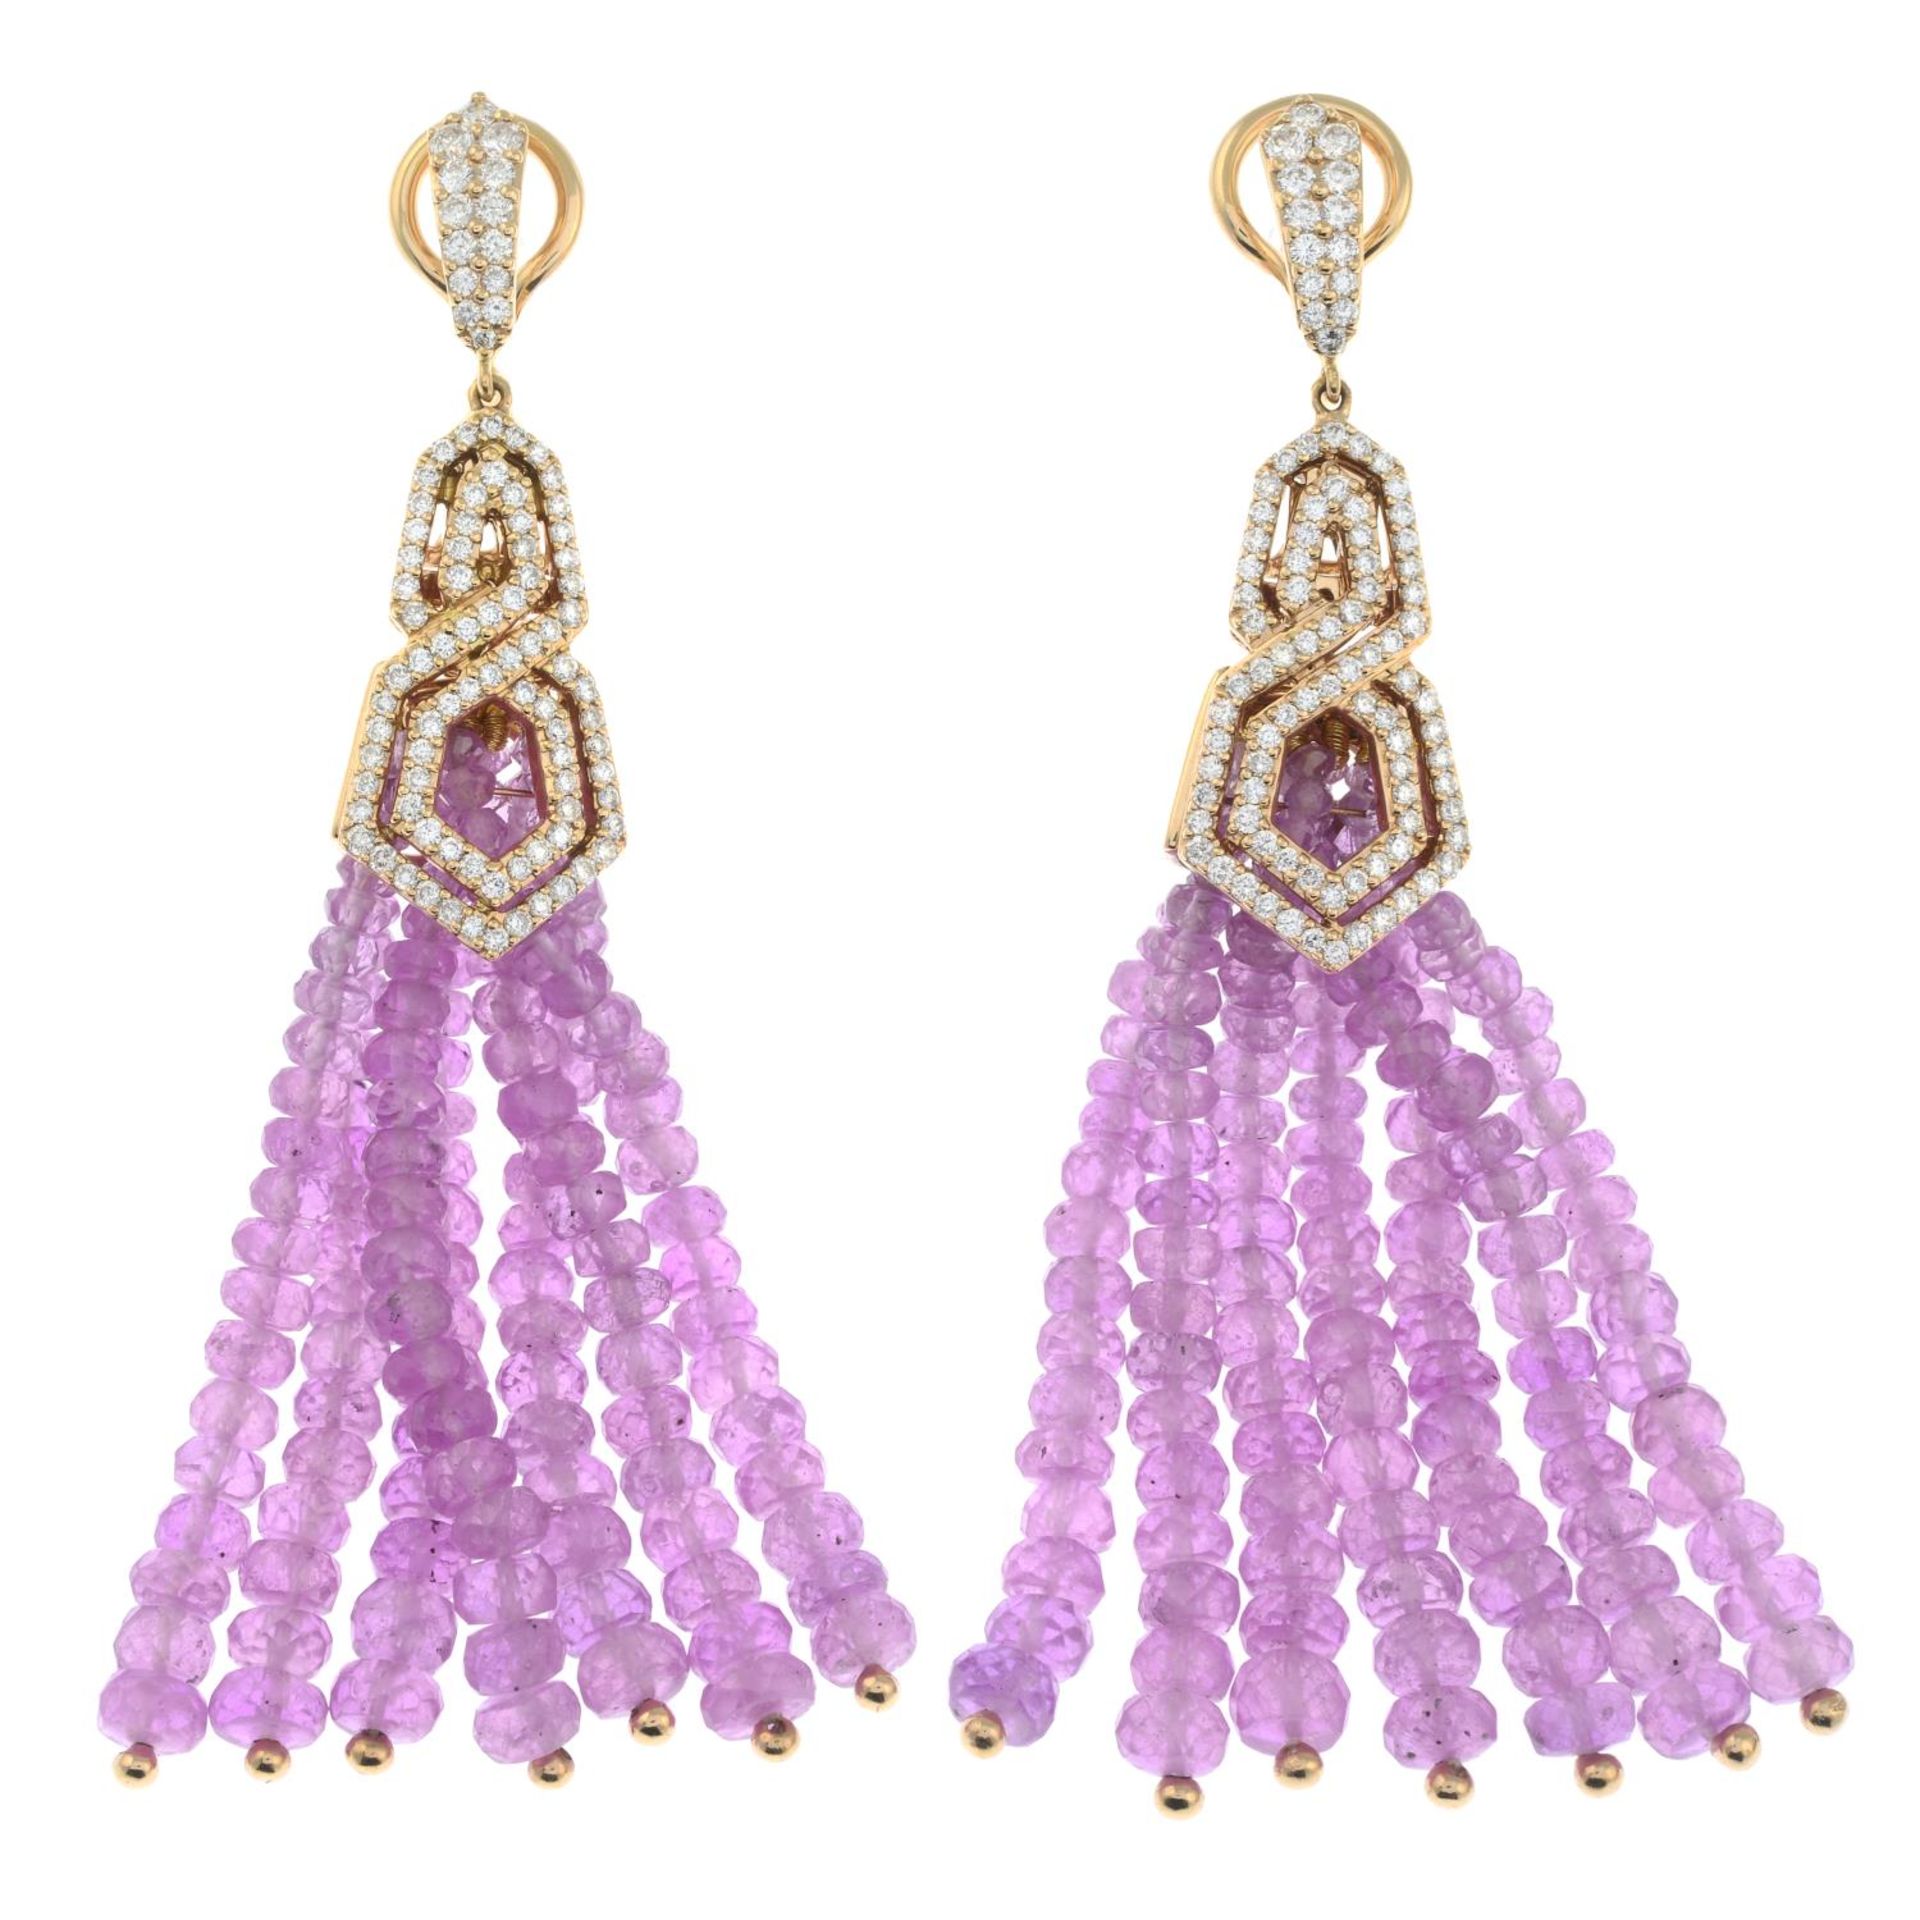 A pair of 18ct gold diamond 'The London Collection' earrings, - Image 2 of 6